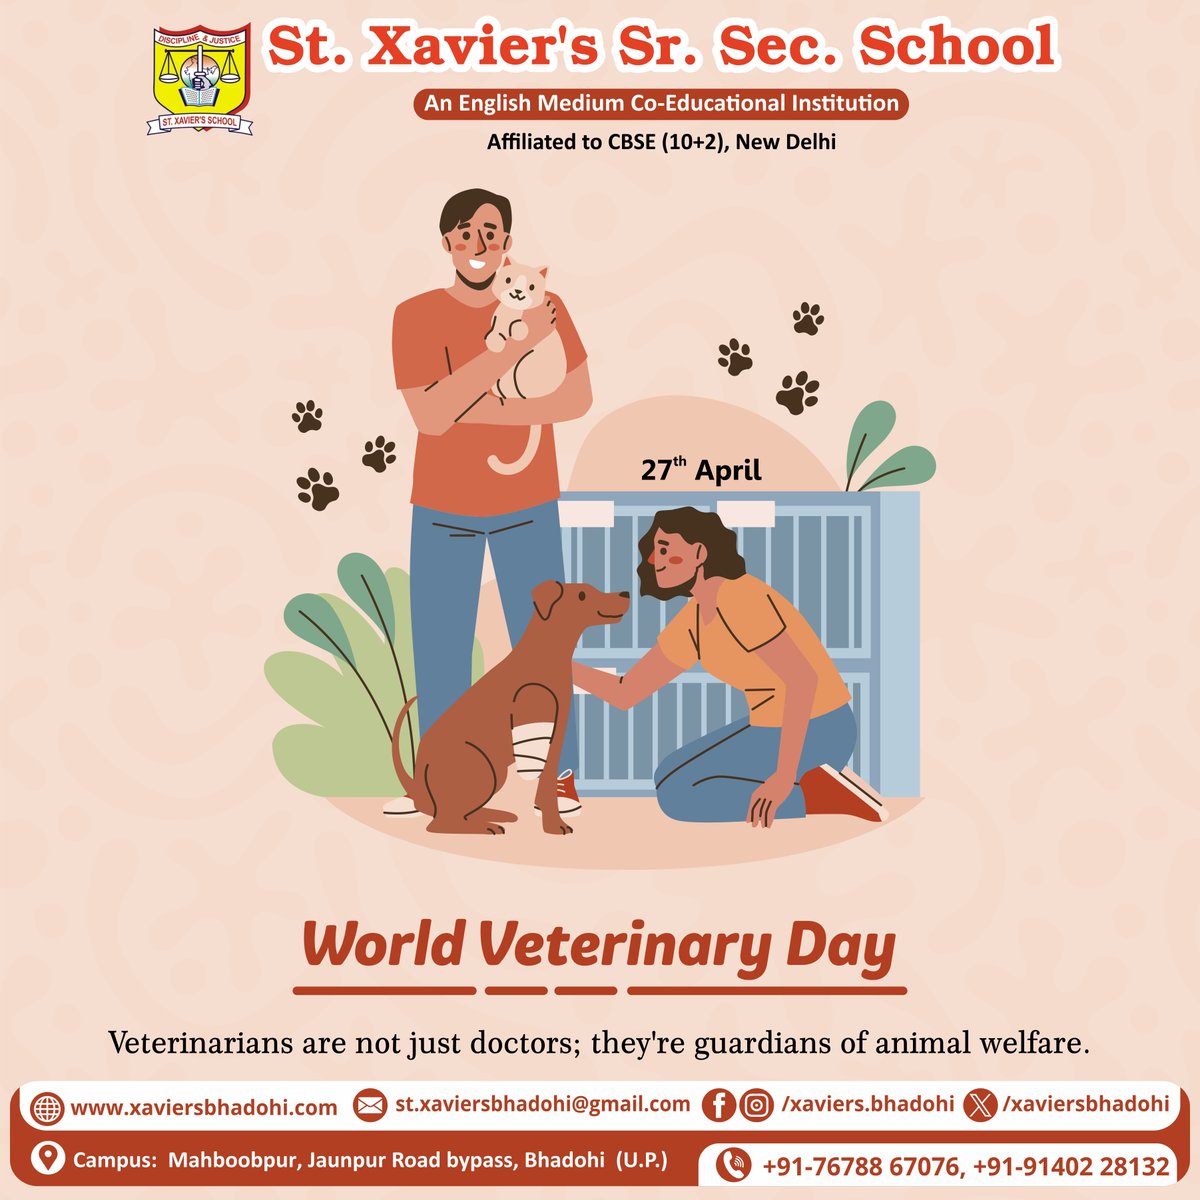 On World Veterinary Day, let's honor the dedication and compassion of veterinarians worldwide. Happy World Veterinary Day!

#WorldVeterinaryDay #VeterinaryDay #AnimalHealth #AnimalDoctors #Veterinarian #AnimalClinic